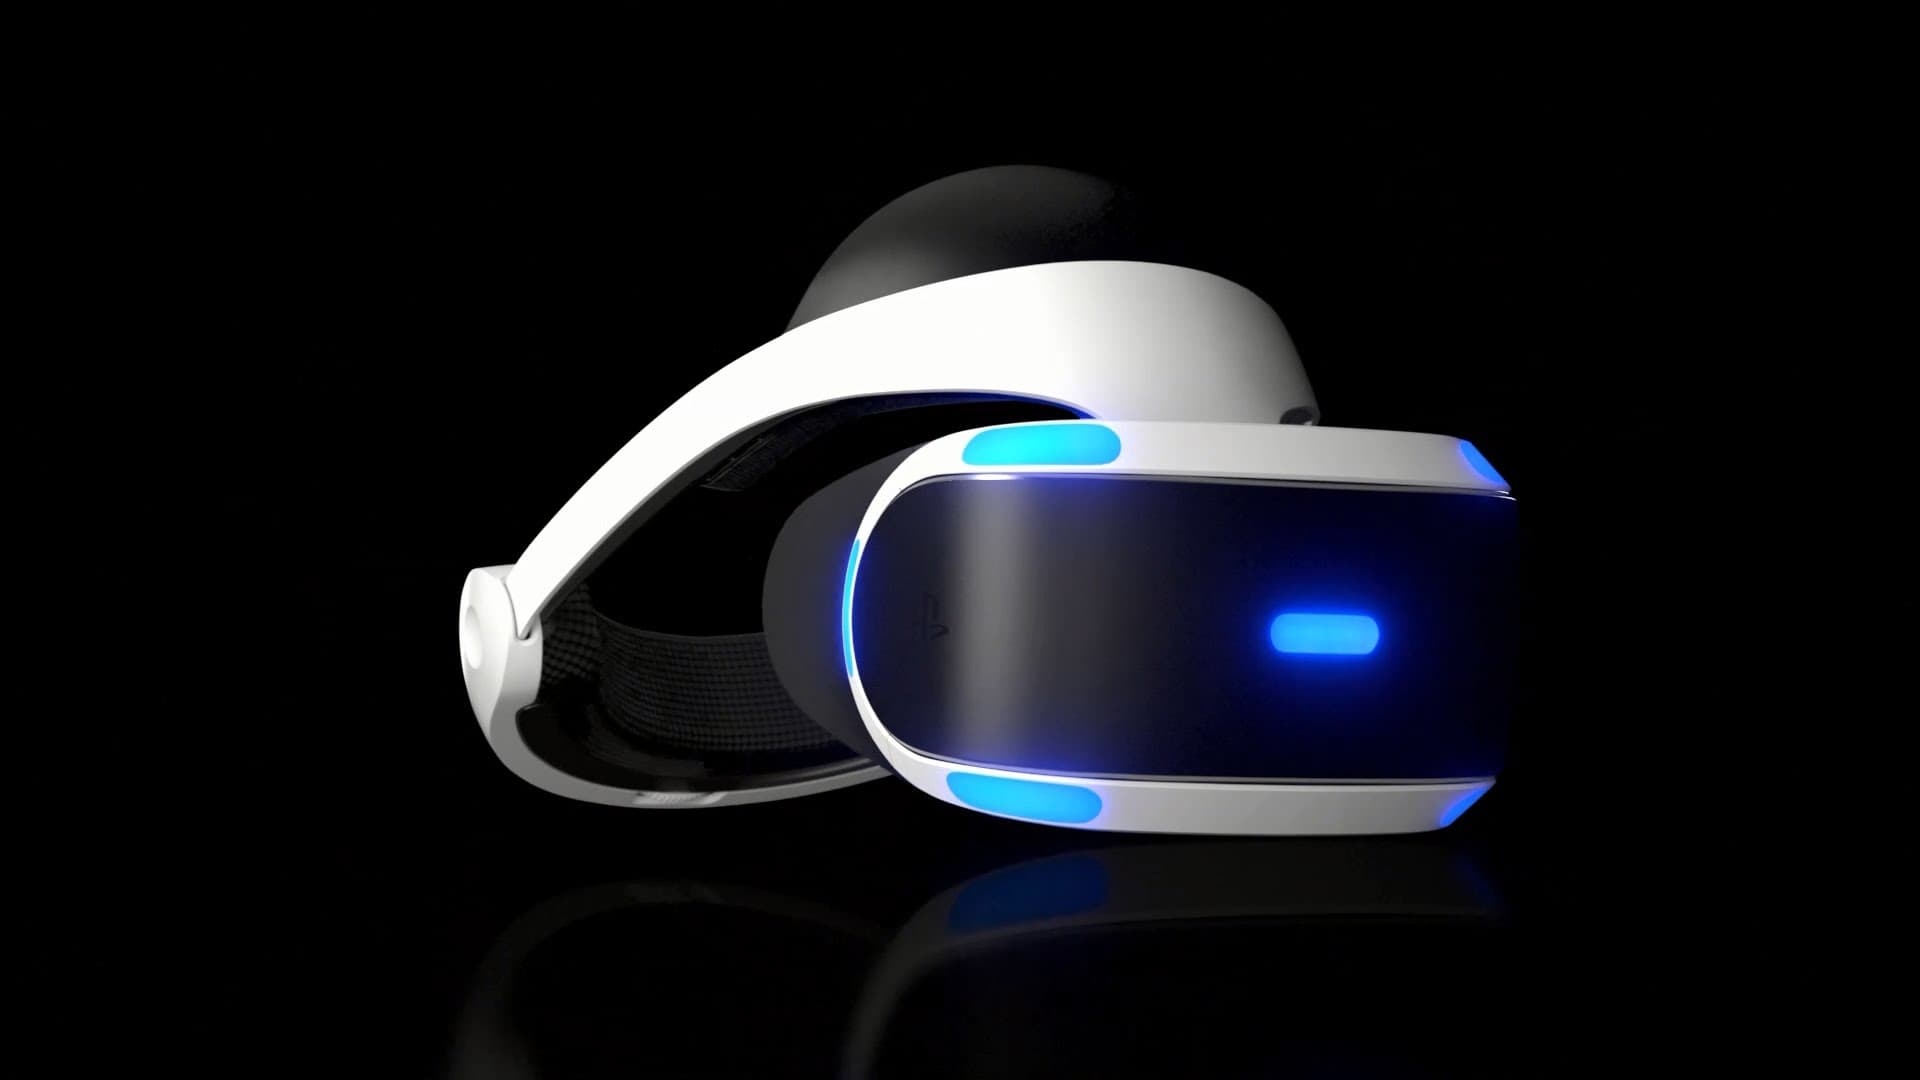 PlayStation VR wallpapers, Immersive gaming experience, Virtual worlds, Next-level gaming, 1920x1080 Full HD Desktop